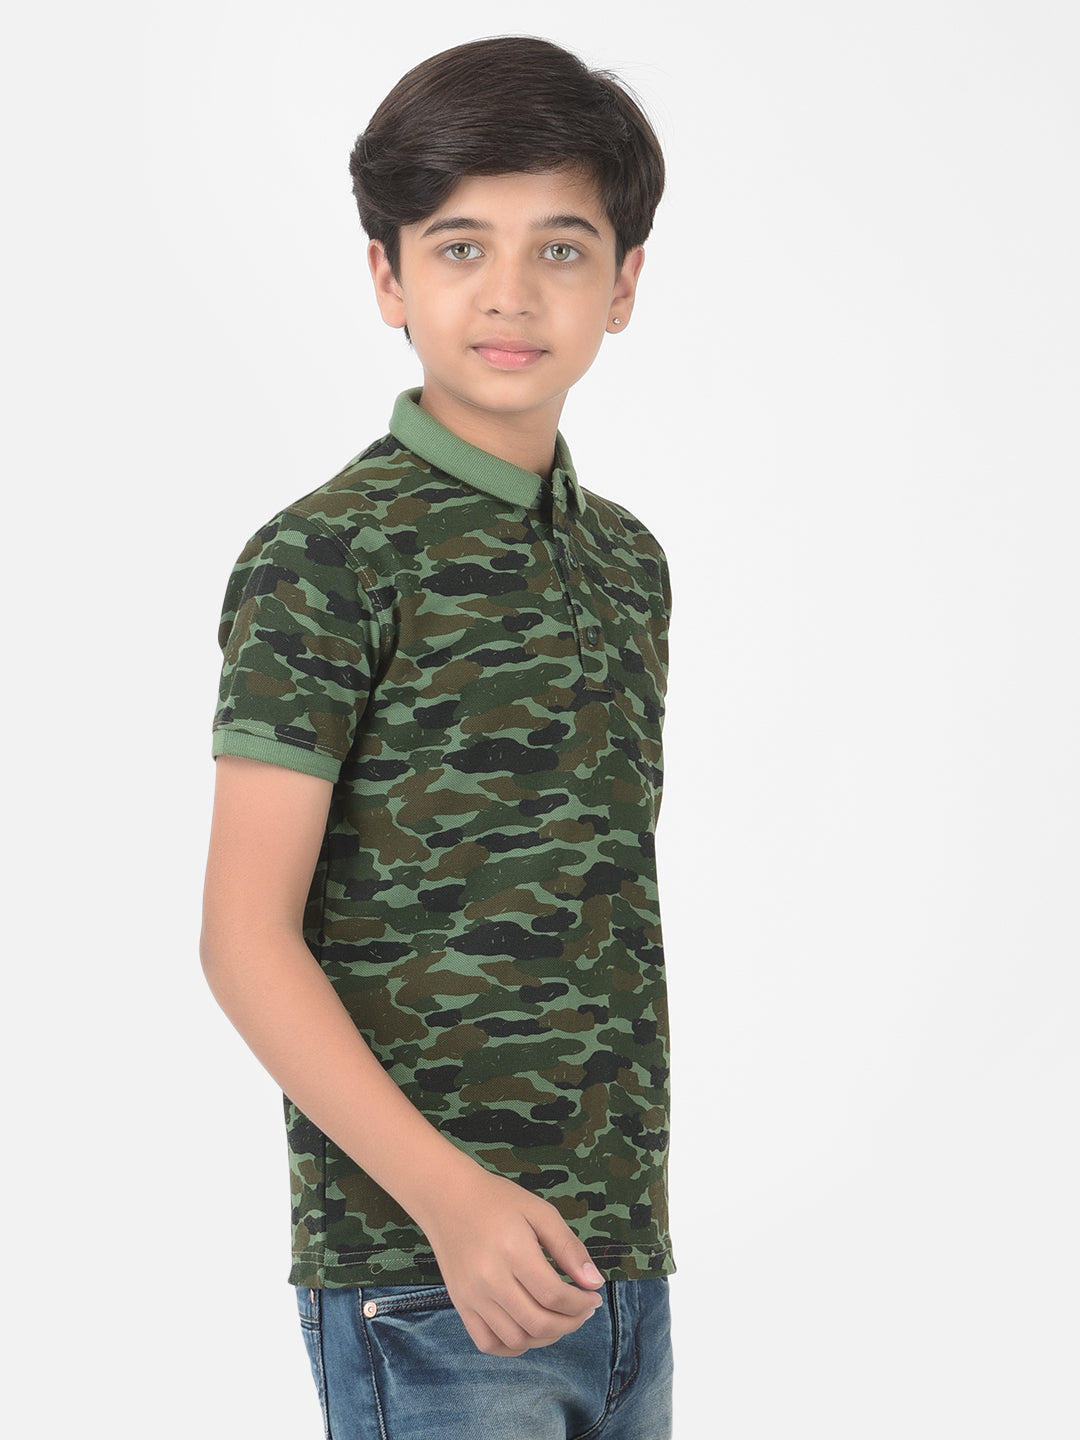 Green Camouflage Printed Polo T-shirt - Boys T-Shirts